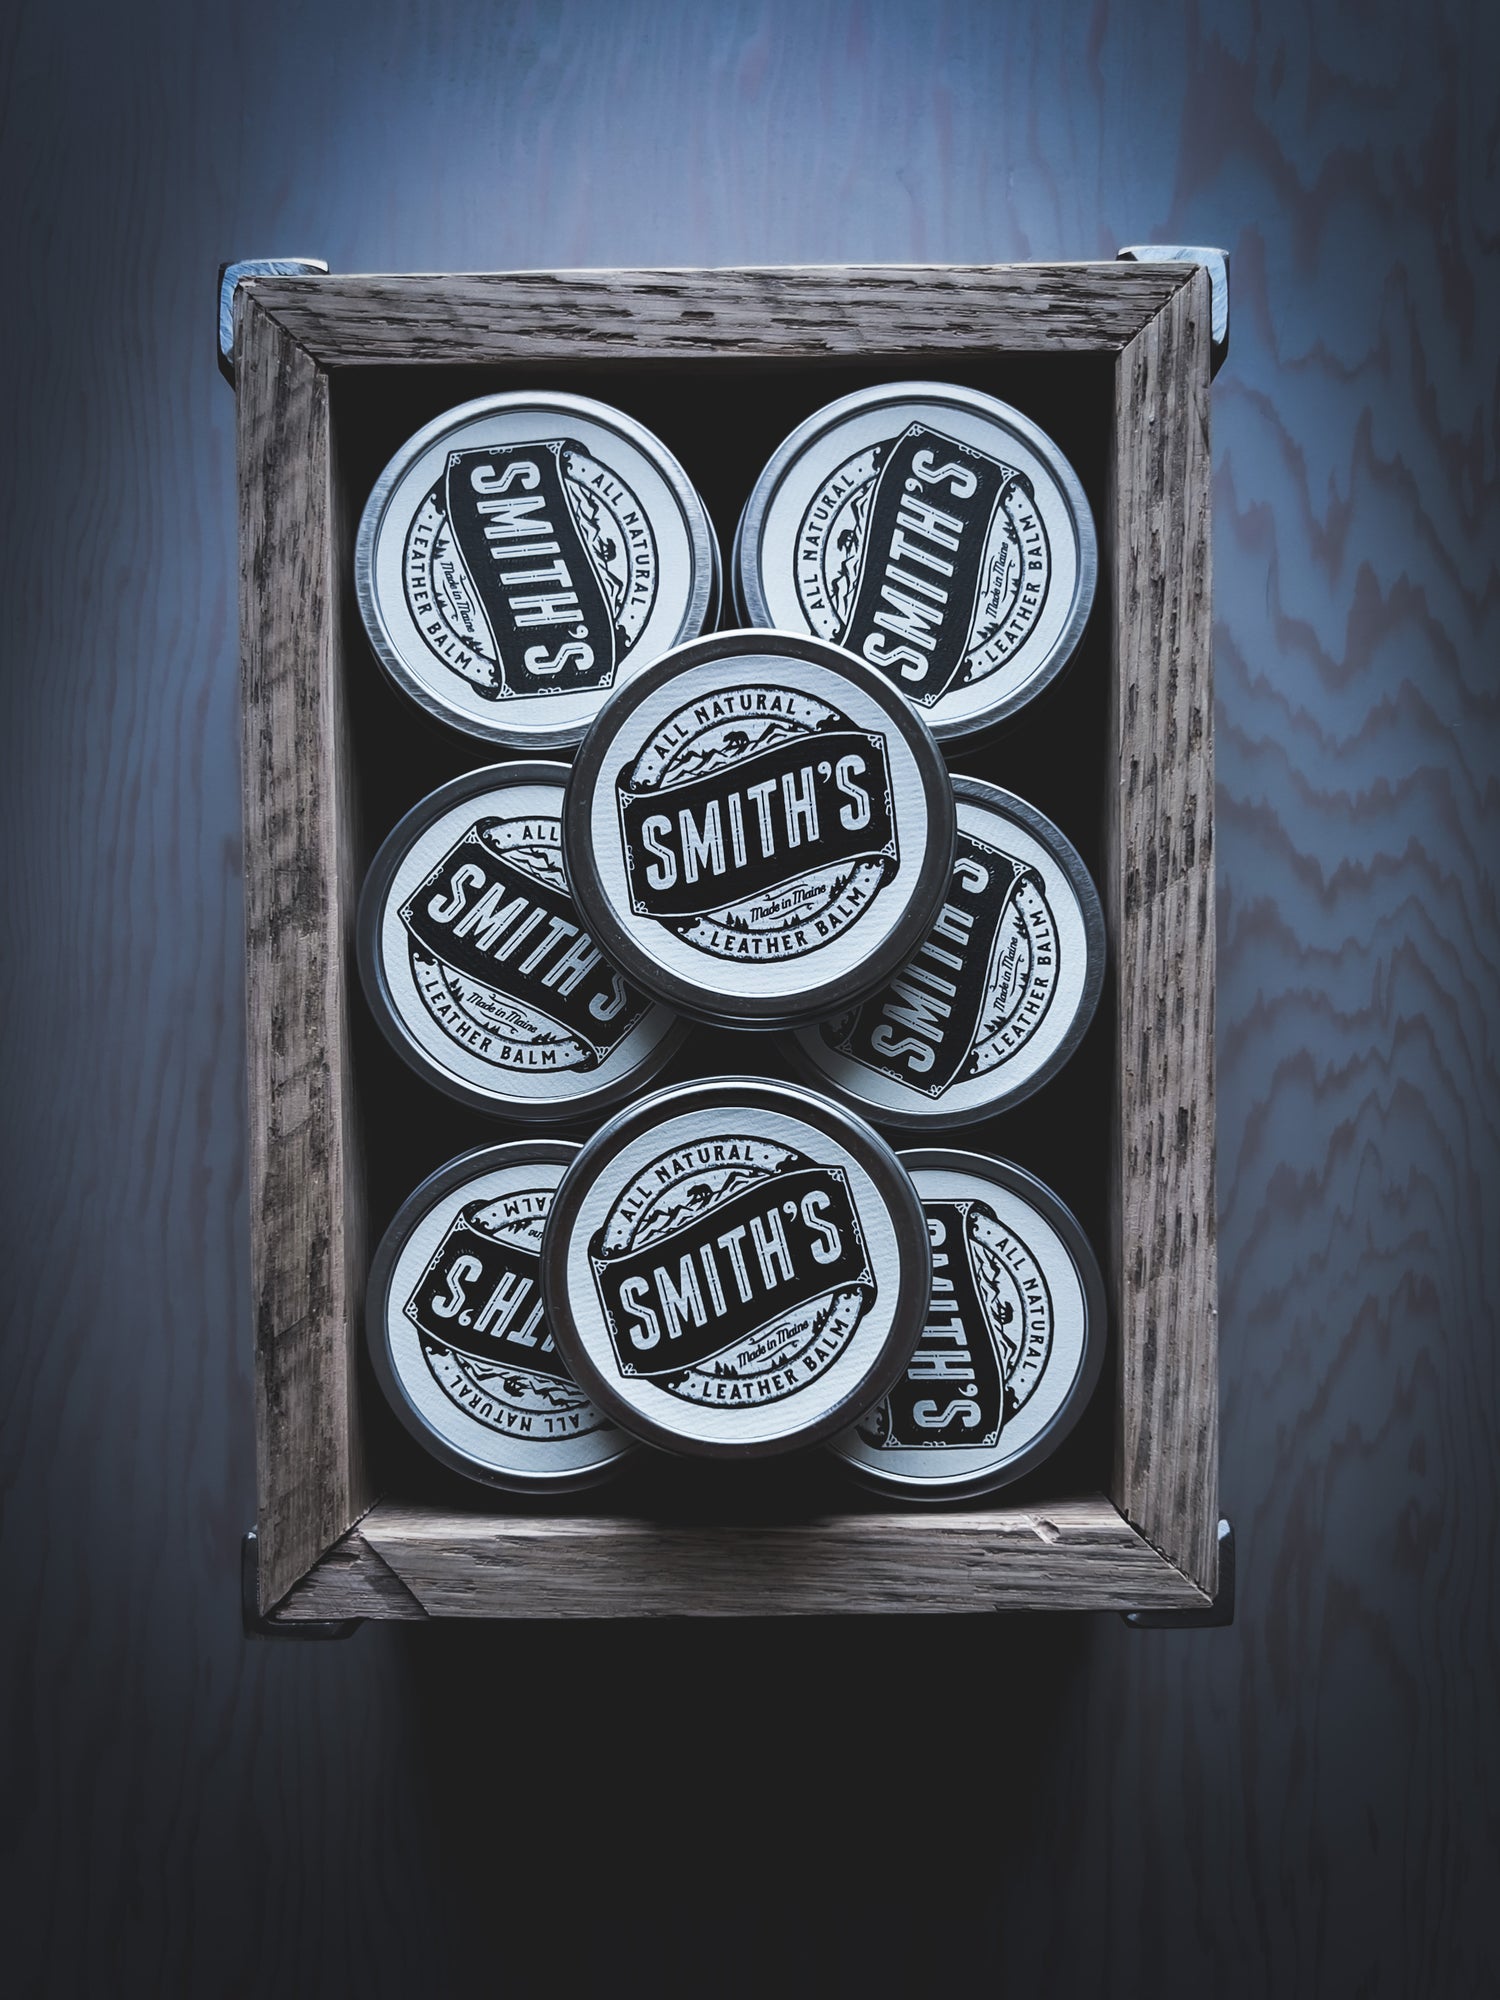 Smith's All Natural Products